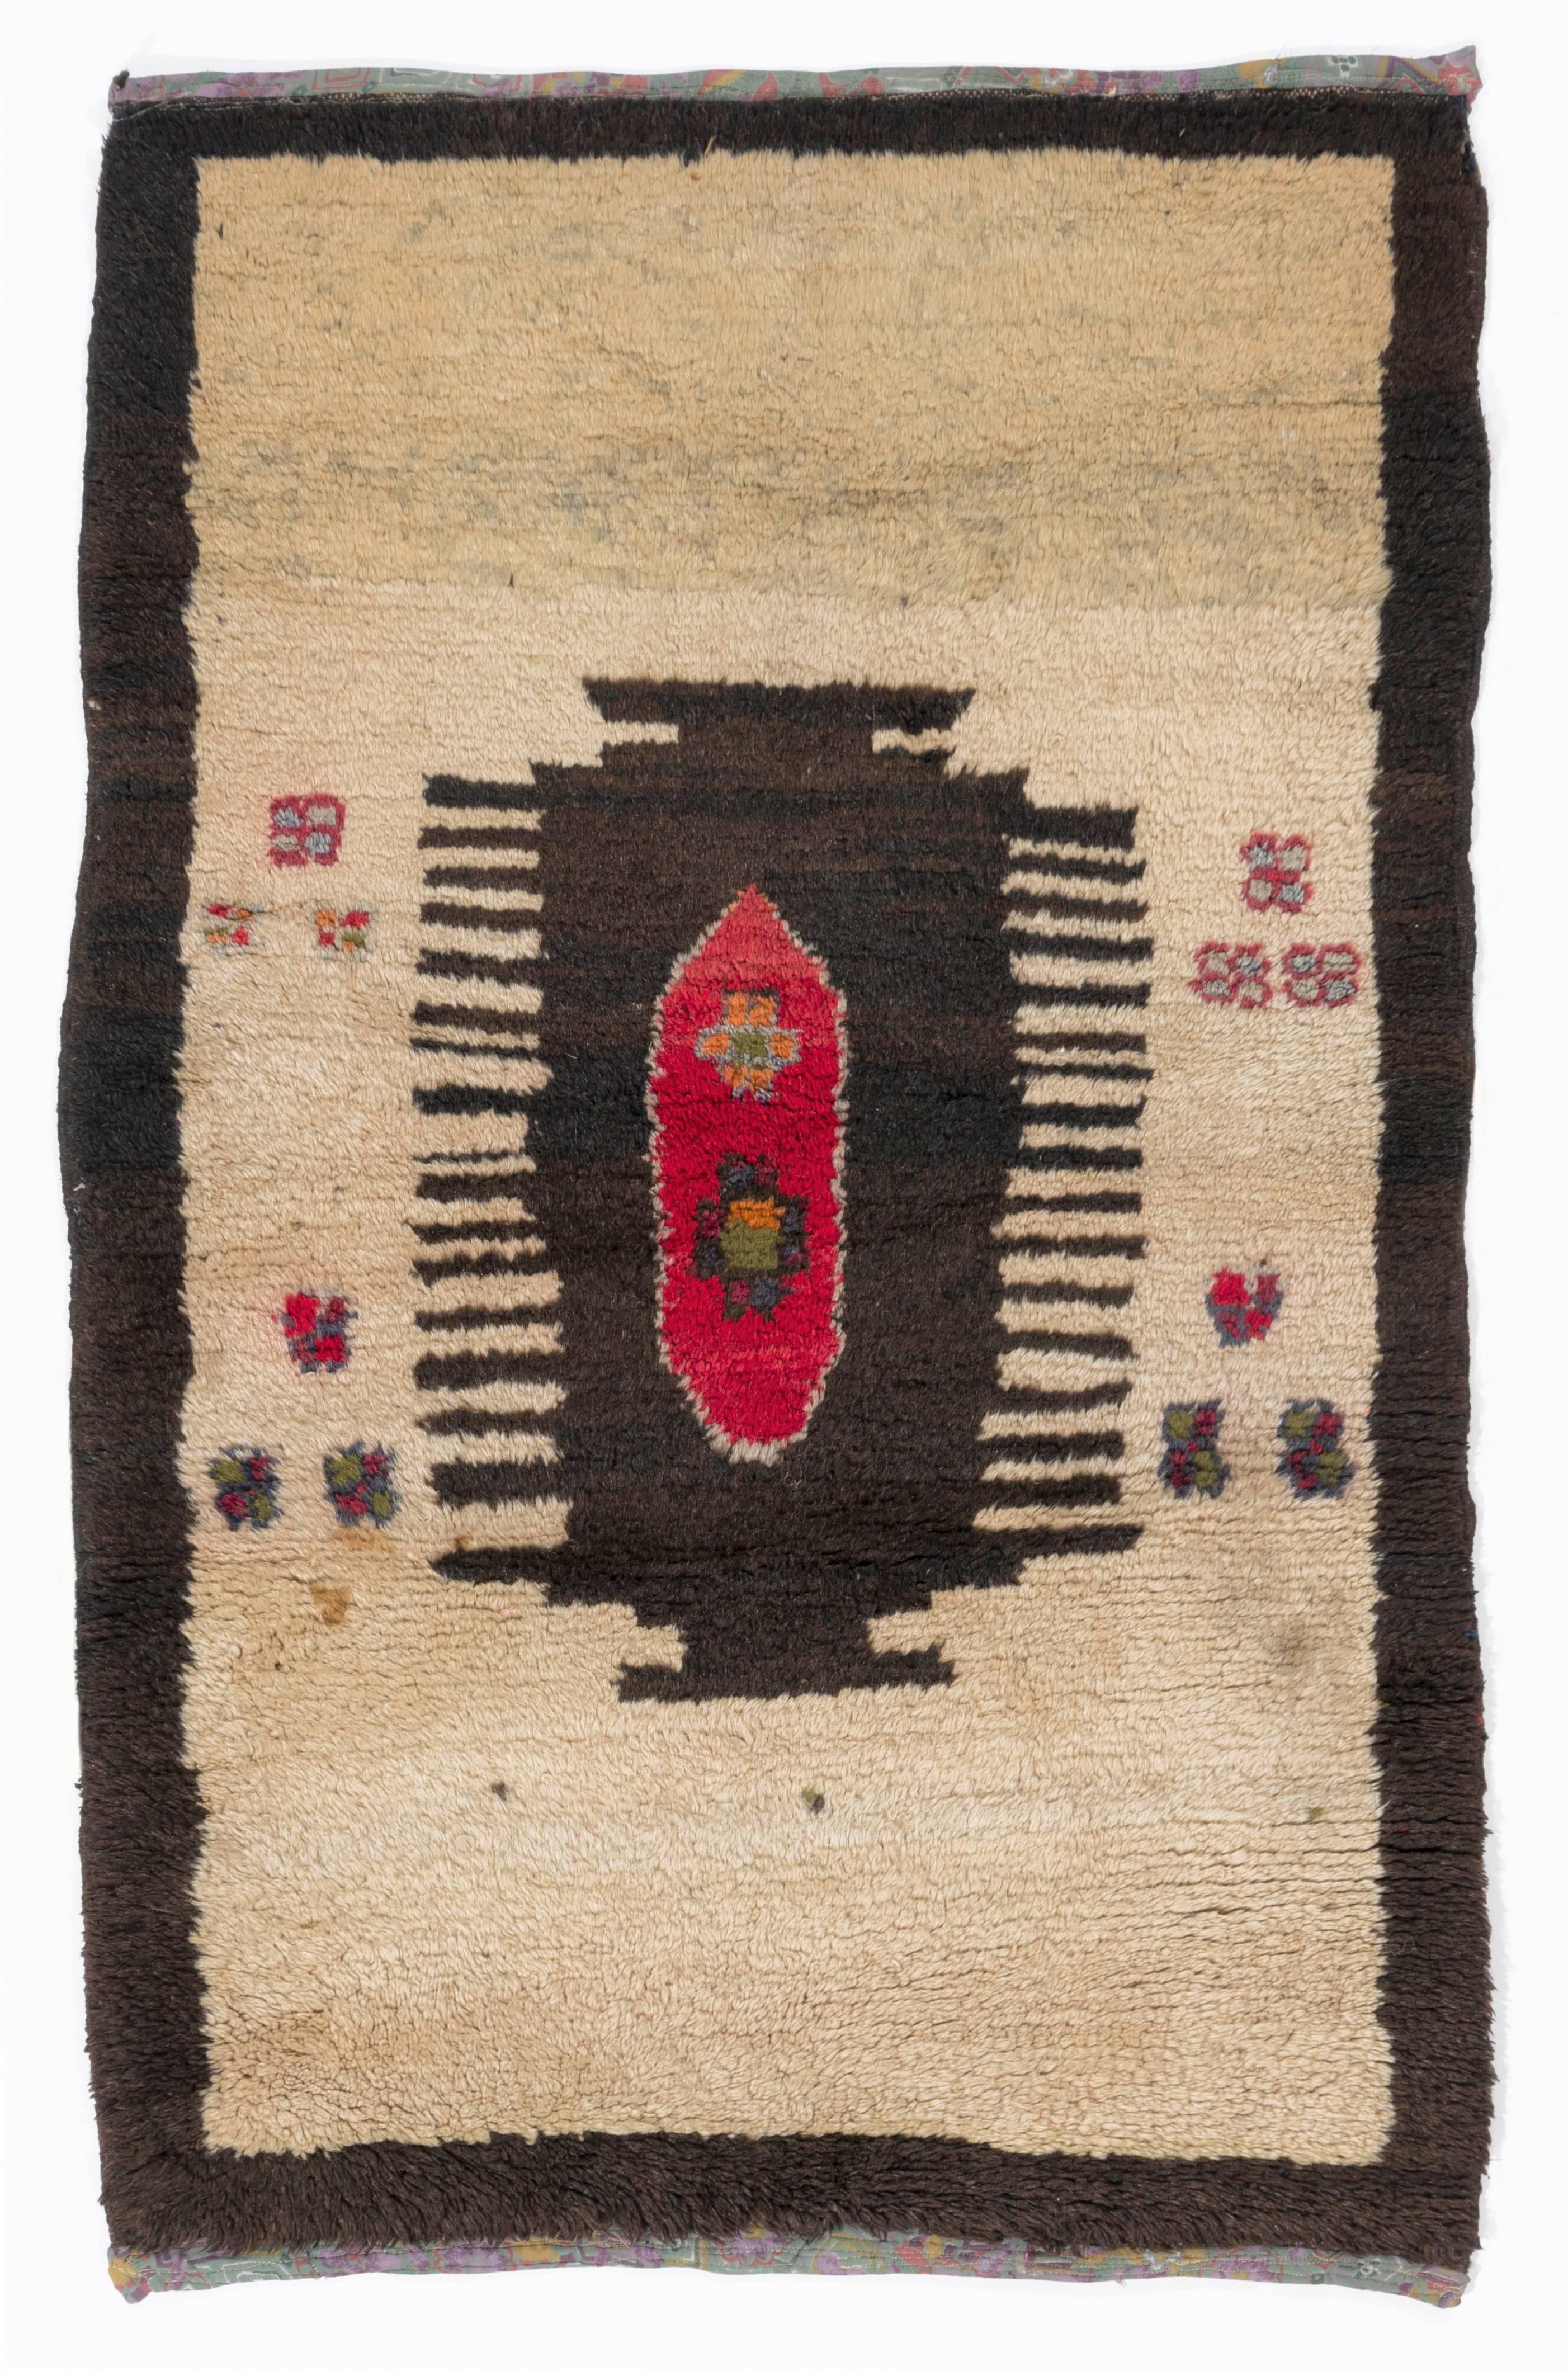 A unique old "Tulu" (Turkish word for shag piled) rug from Central Anatolia. 100% wool. 

These charming and somewhat Primitive small rugs with long wool pile were produced for daily use by the nomads and villagers in Central Anatolia